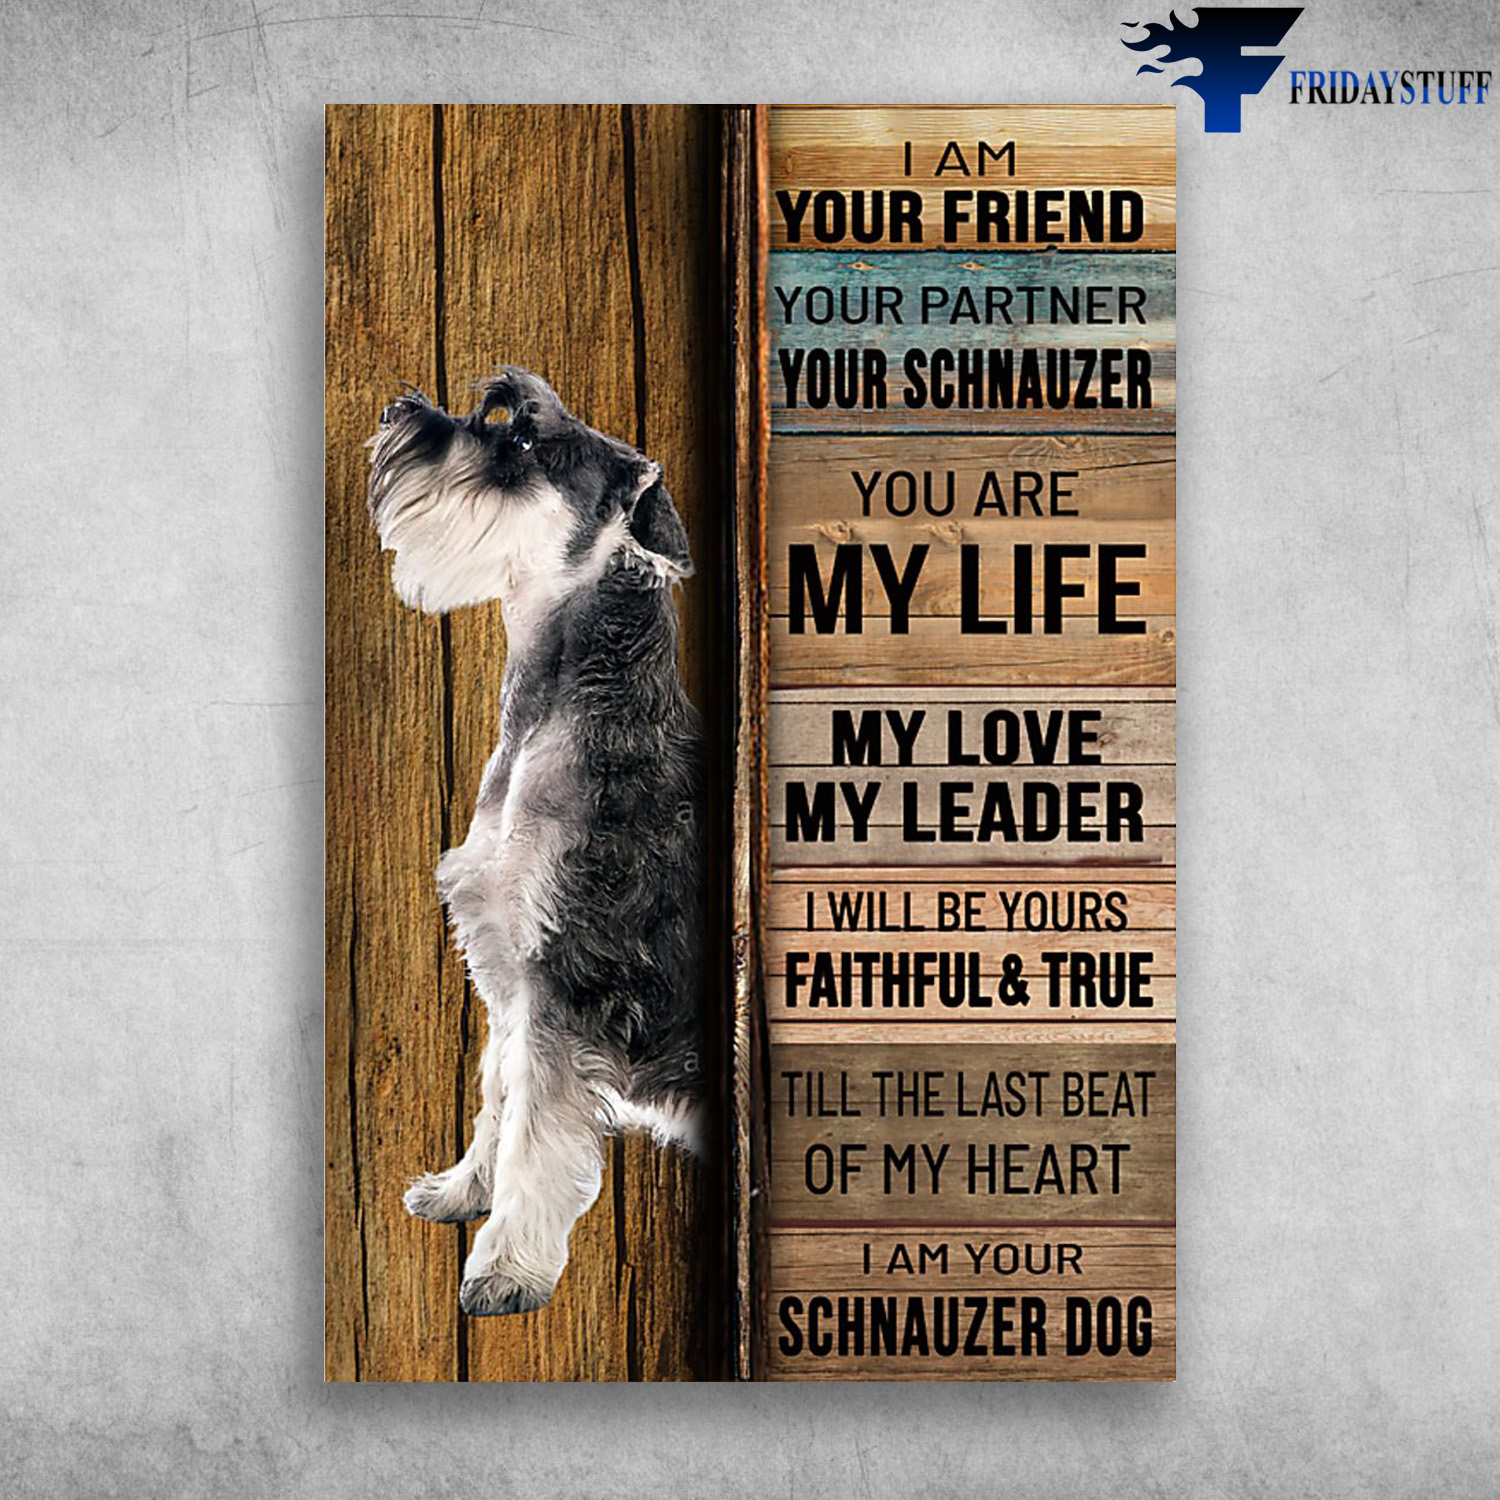 Schnauzer Dog - I Am Your Friend, Your Partner, Your Schnauzer, You Are My Life, My Love, My Leader, I Will Be Yours Faithful And True, Till The Last Beat Of My Heart, I Am Your Schnauzer